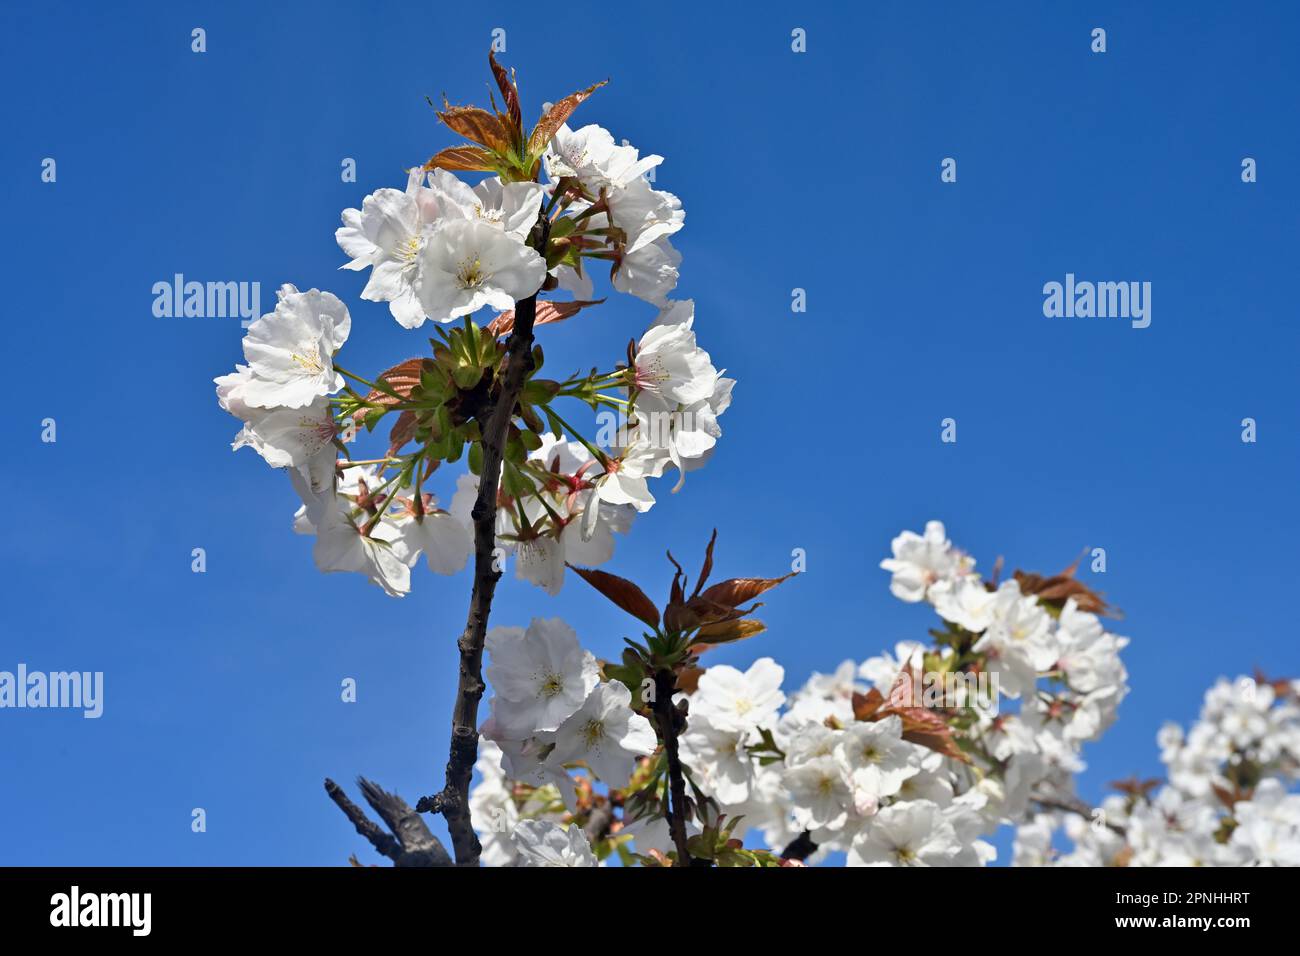 White blossom close up on flowering cherry tree with leaves just emerging, spring Stock Photo